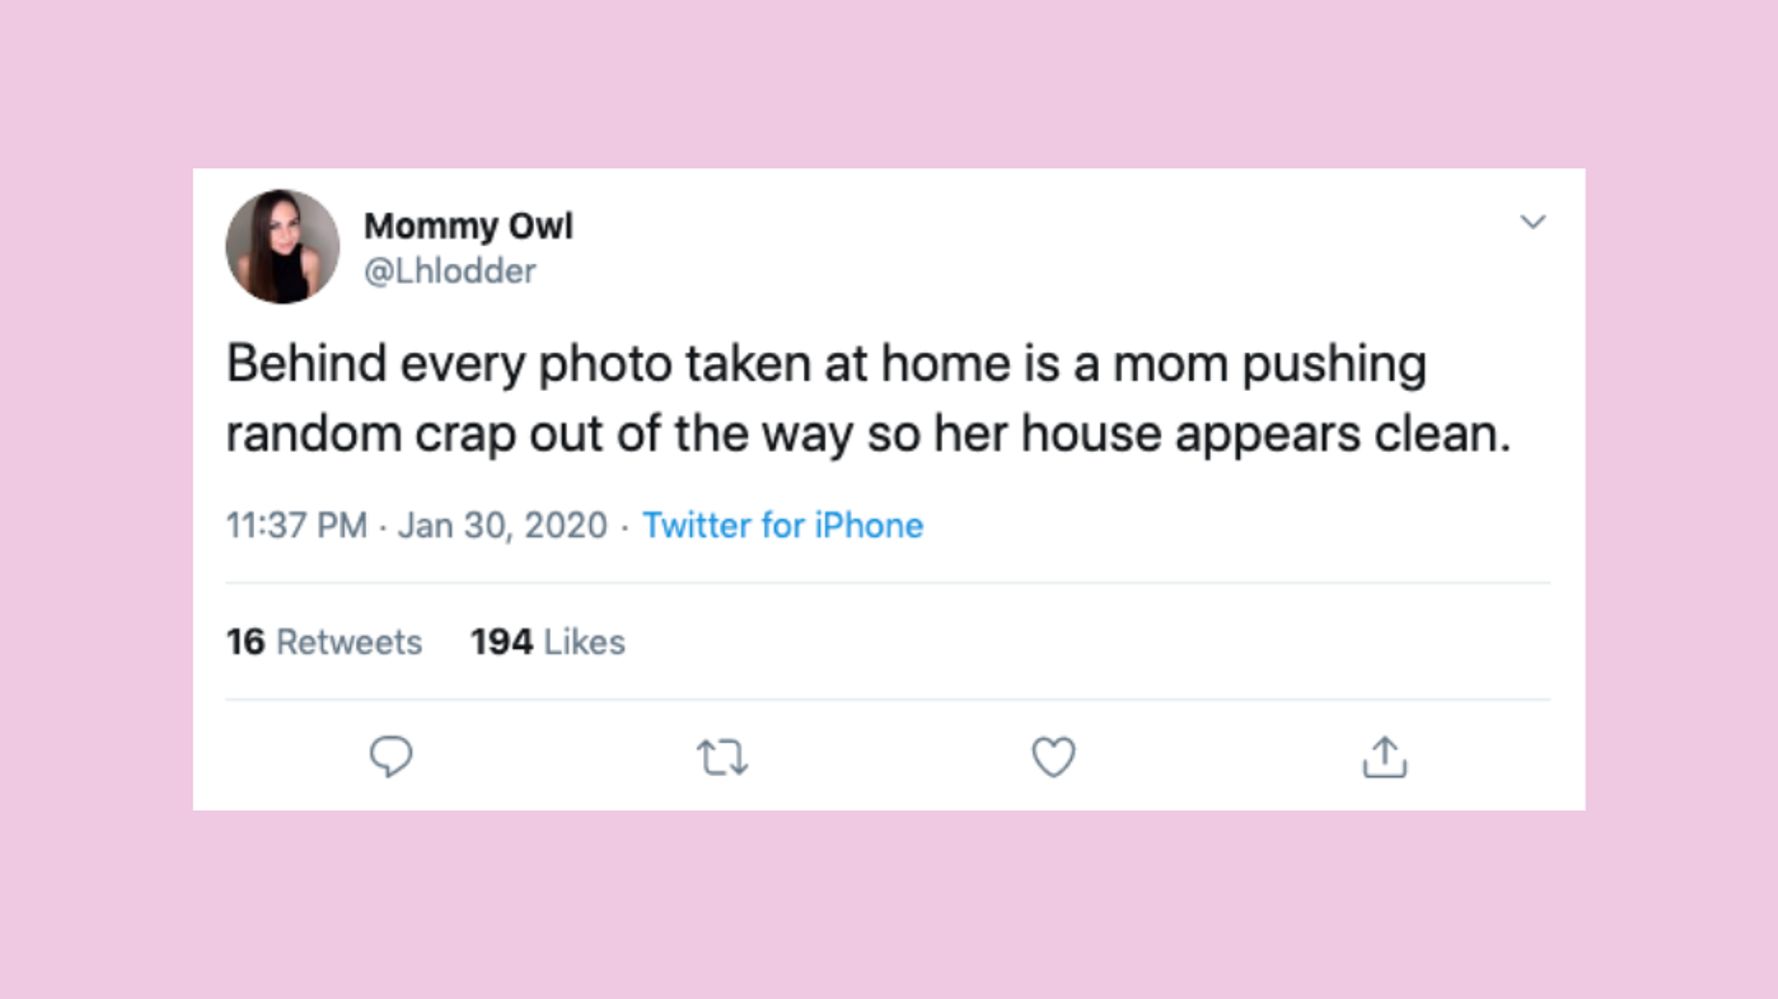 The Funniest Tweets From Parents This Week | HuffPost UK Parents